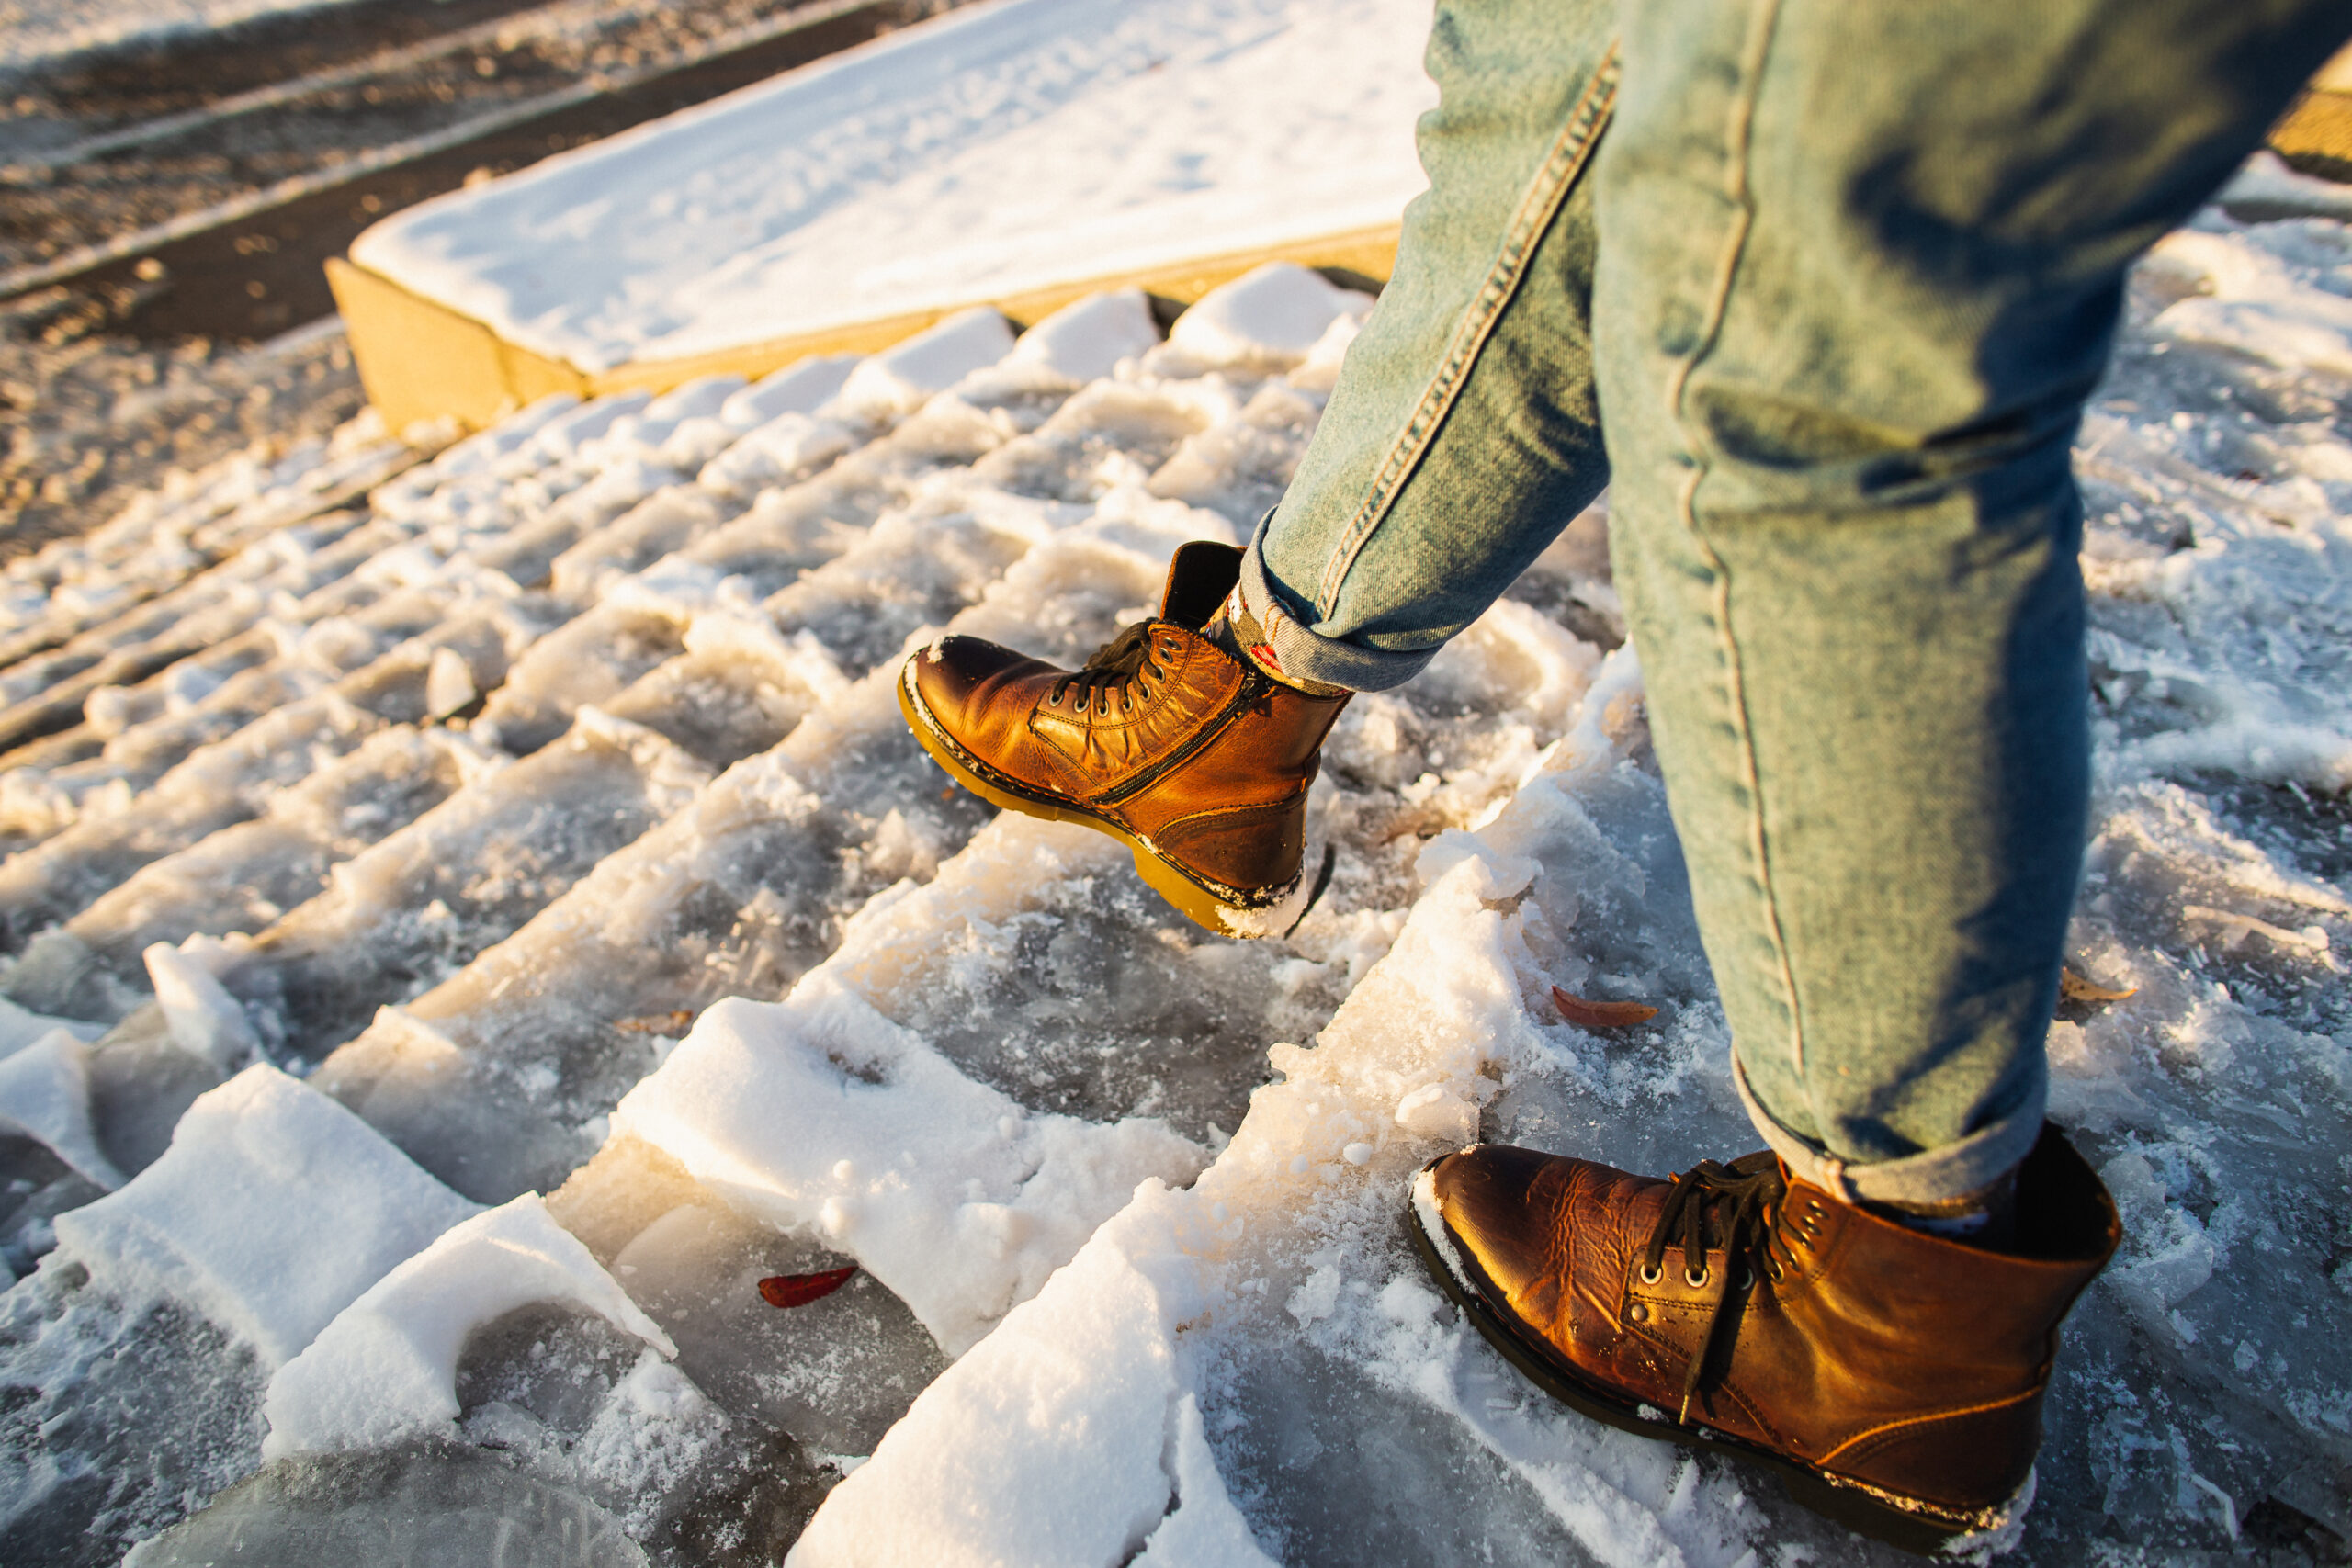 A person in blue jeans and brown boots walks up icy, snow-covered steps. The image captures their legs and feet, highlighting the texture of both the boots and the ice.